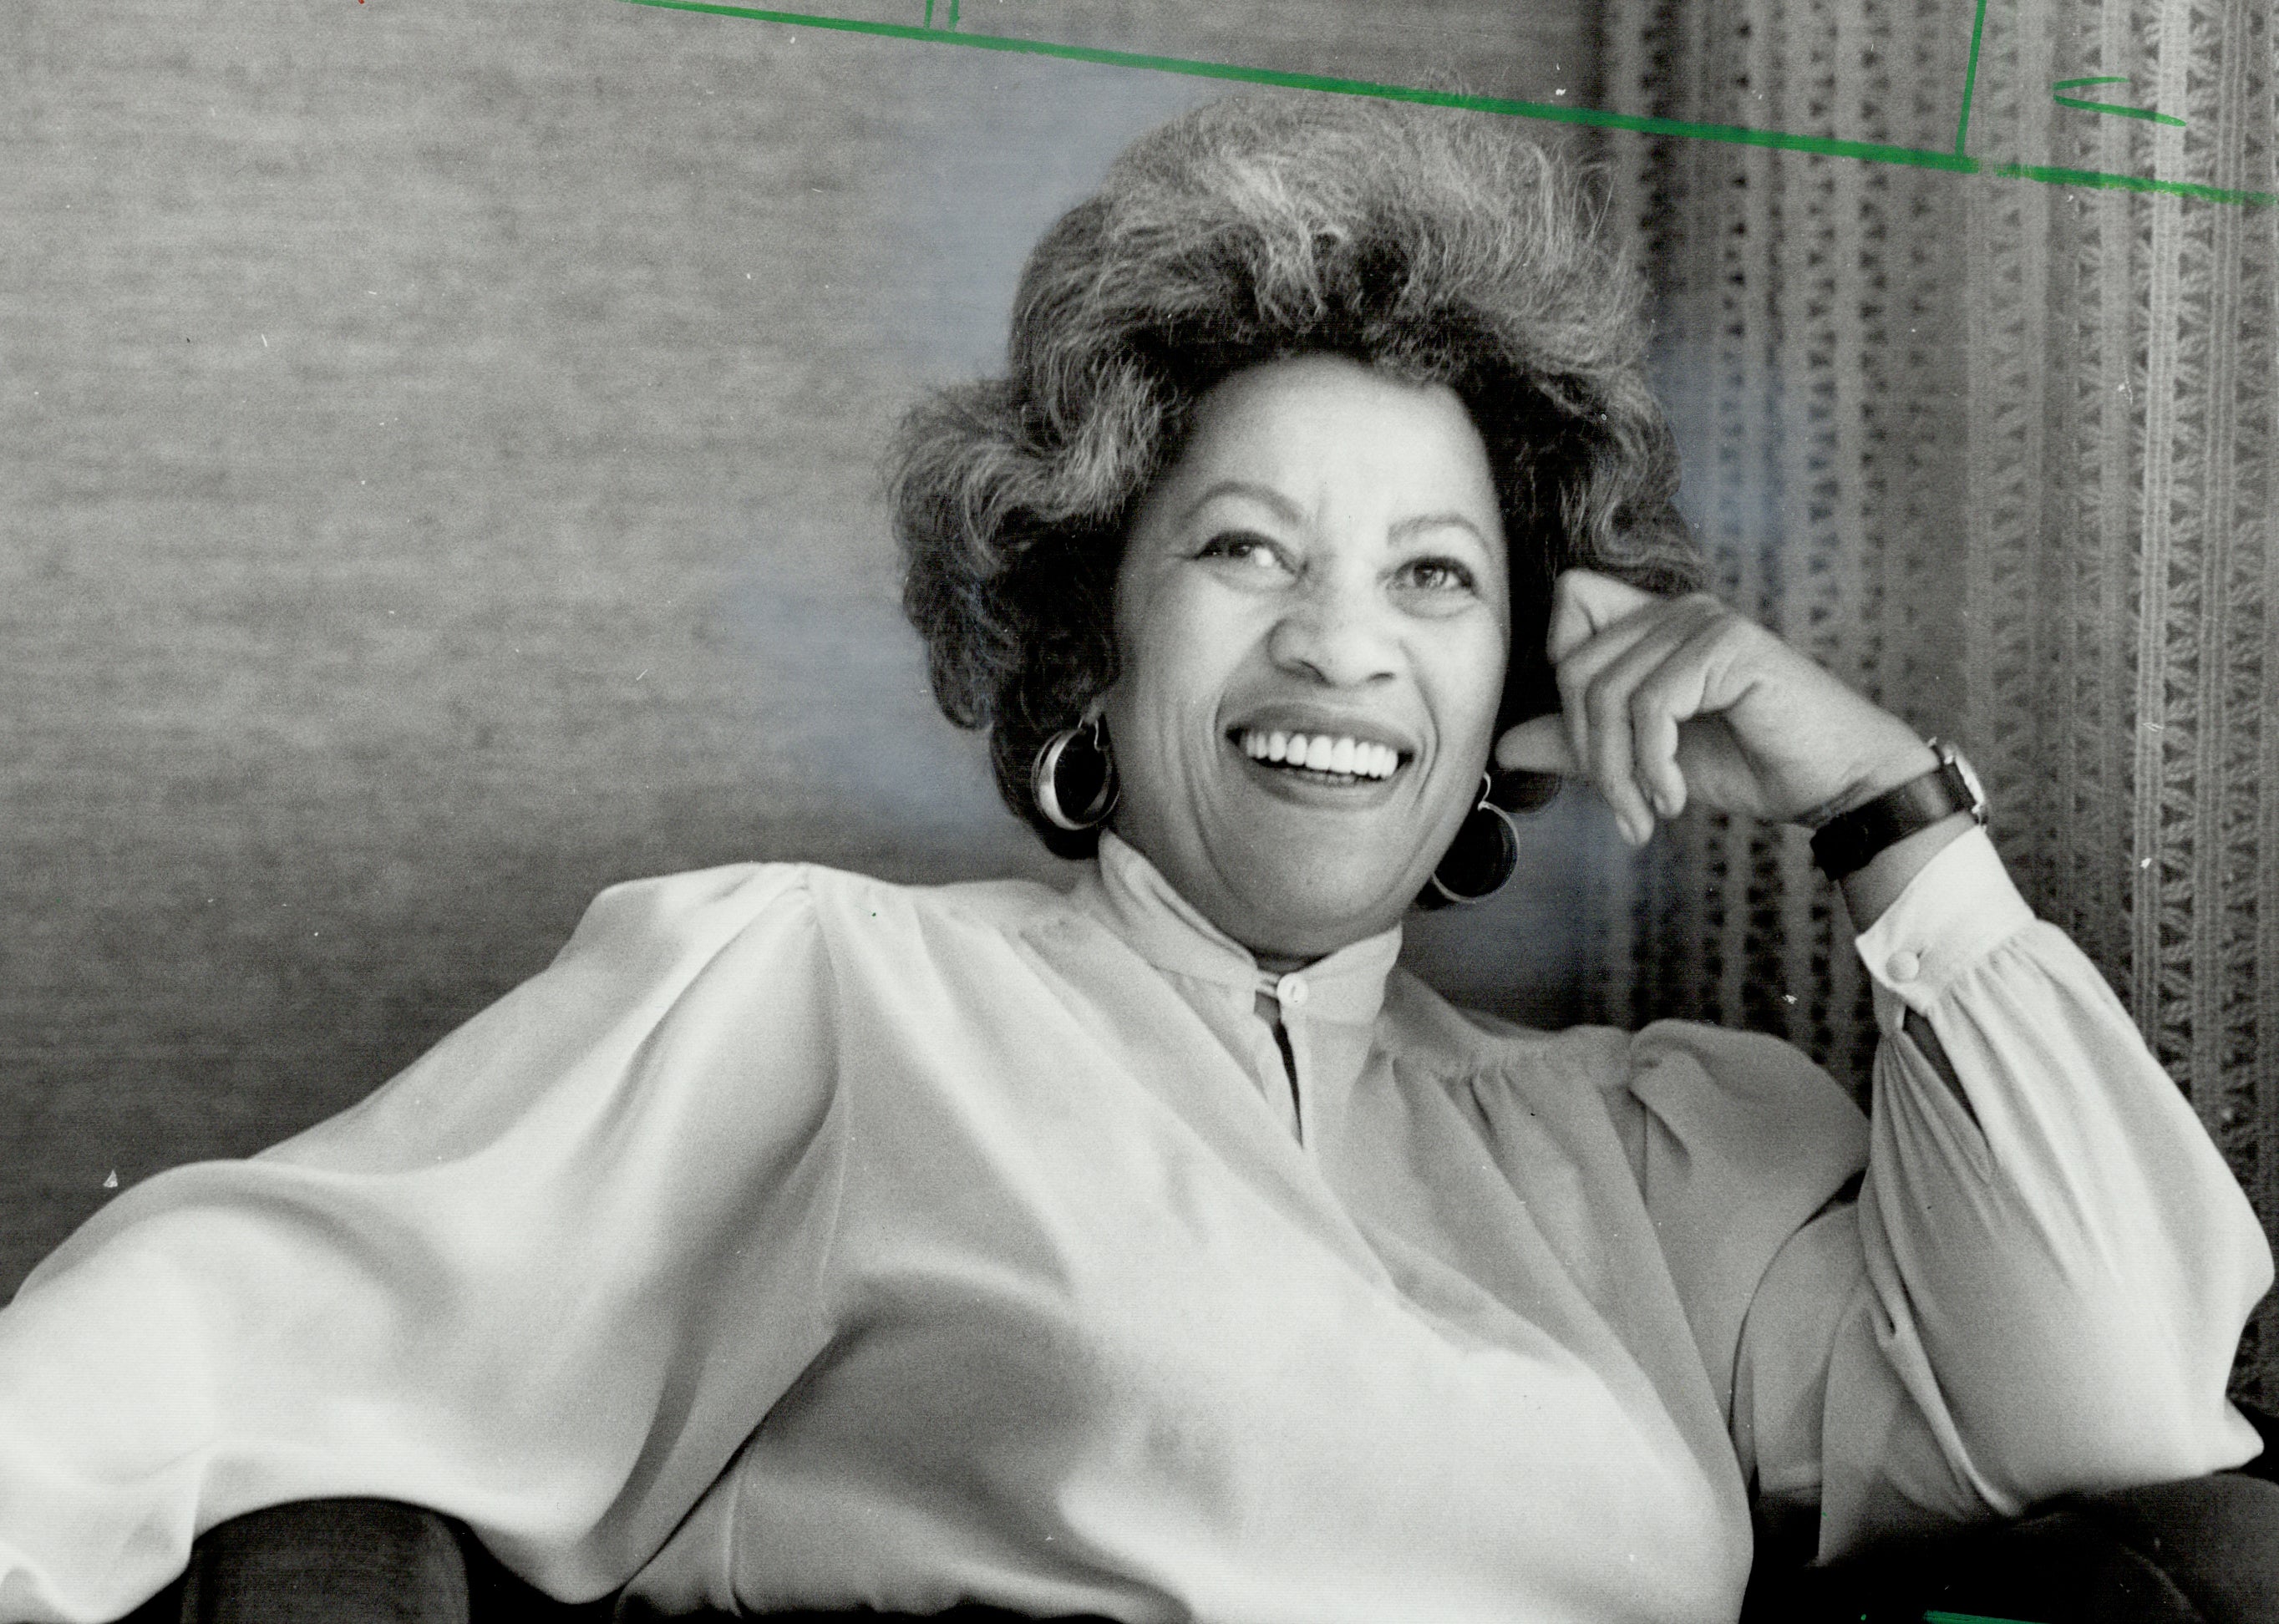 A Celebration of Toni’s Morrison’s Life in Pictures